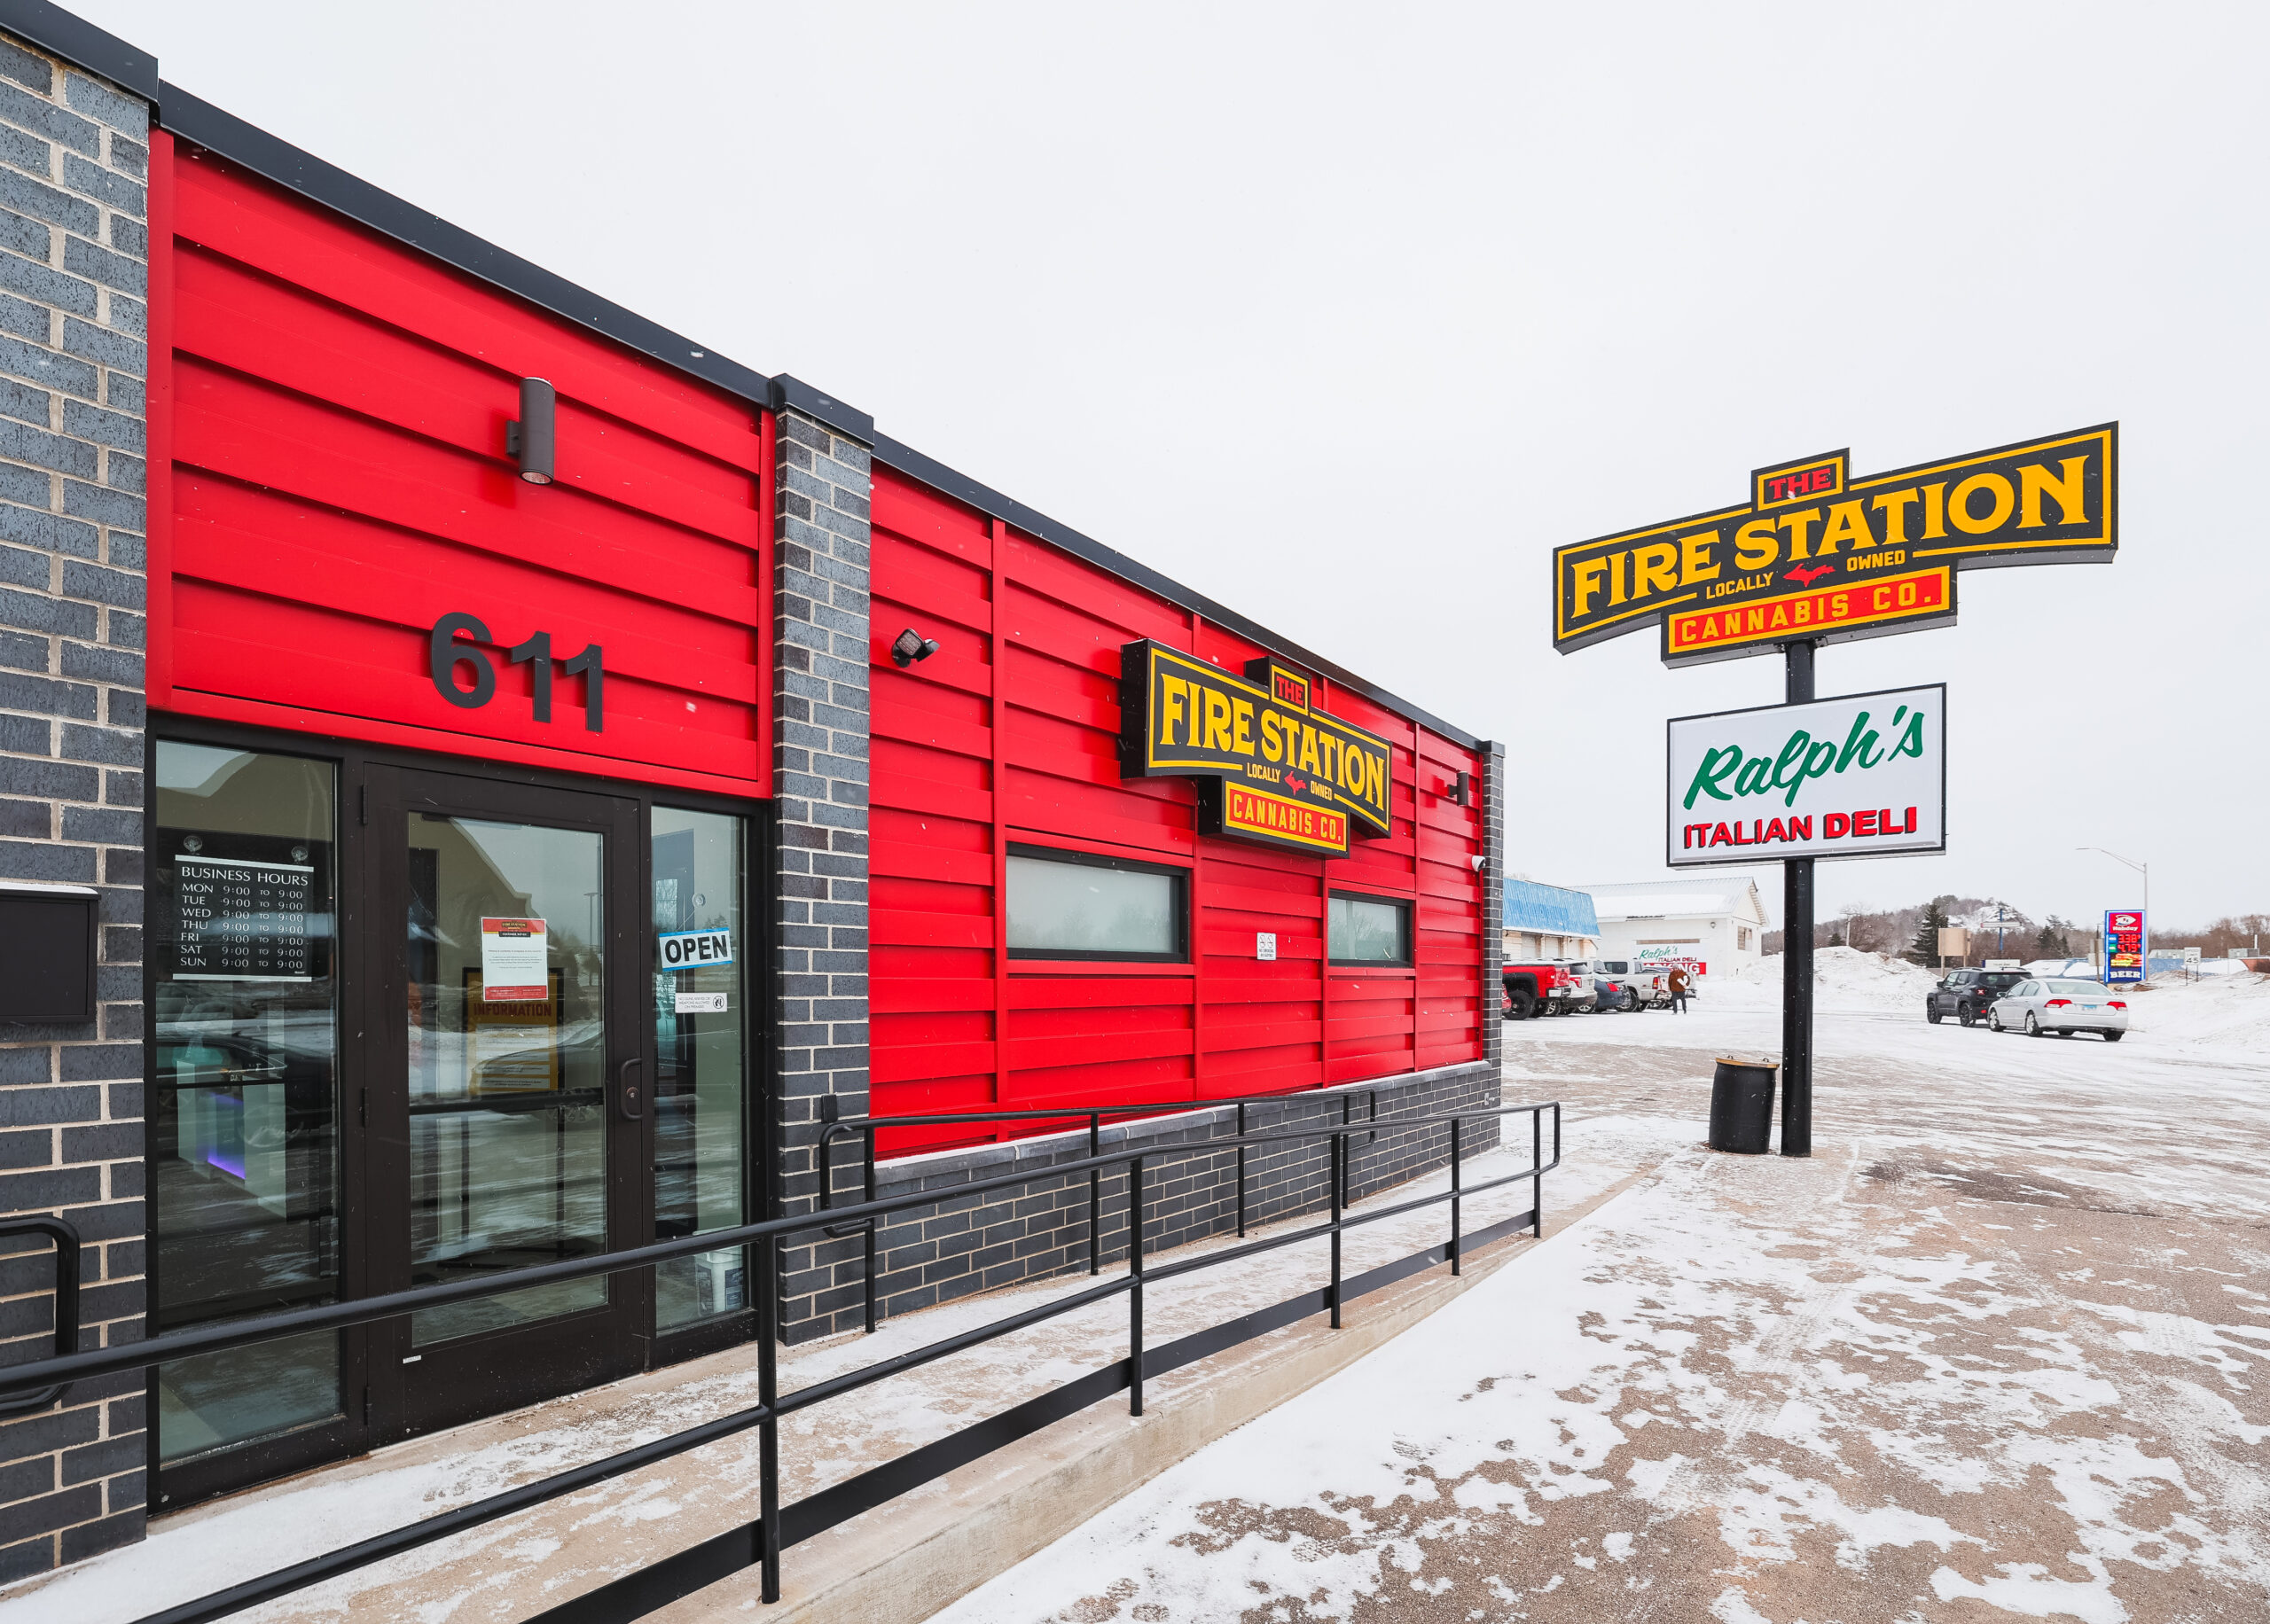 The Fire Station Cannabis Company is located in Michigan's Upper Peninsula across 8 locations - Marquette, Negaunee, Ishpeming, Houghton, Hannahville, Iron River, Munising and Sault Ste. Marie.